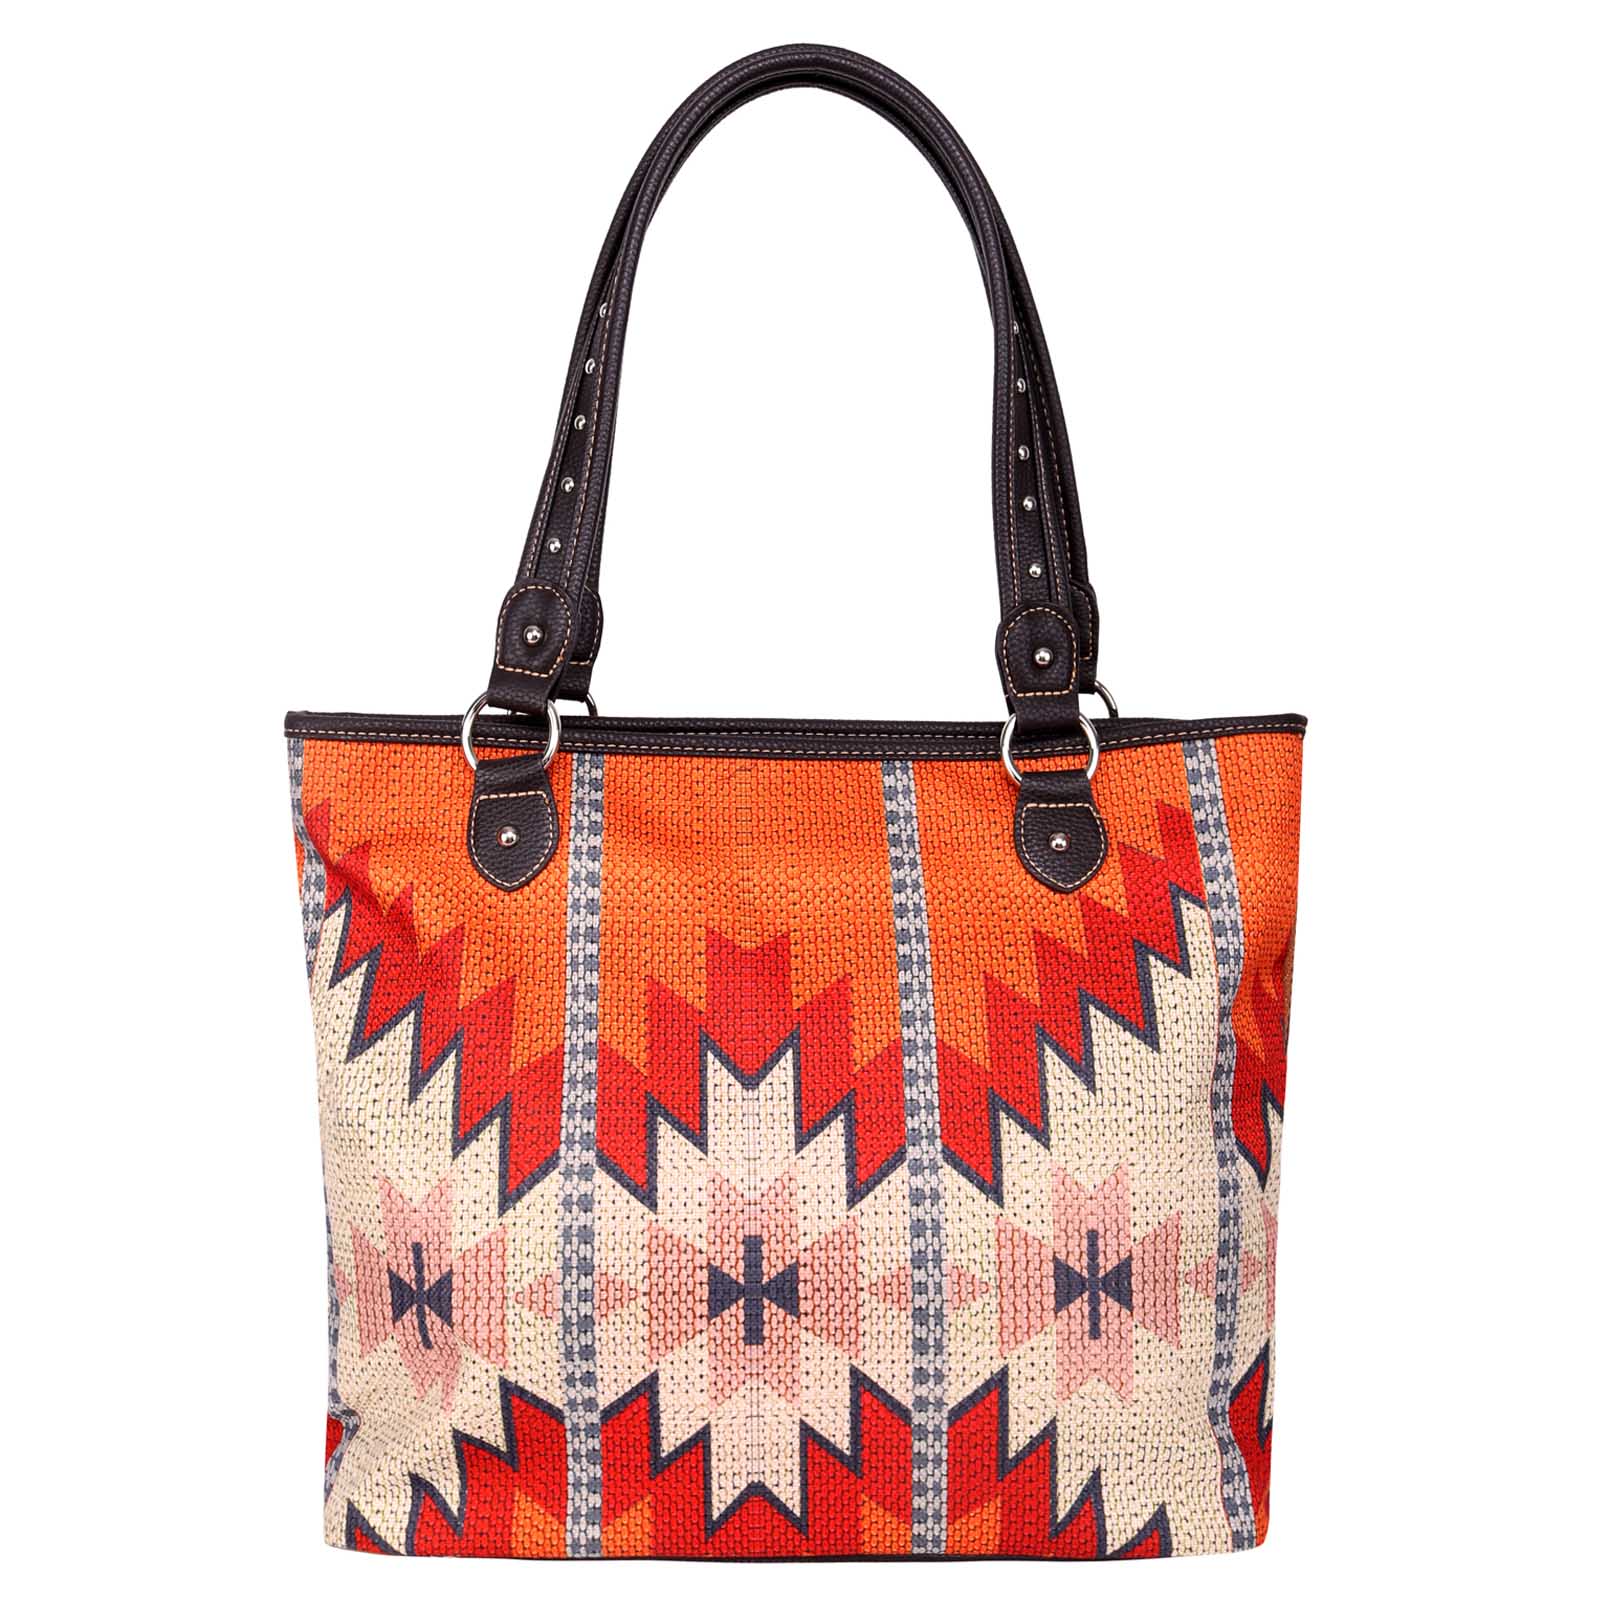 Montana West Aztec Canvas Tote Bag - Cowgirl Wear